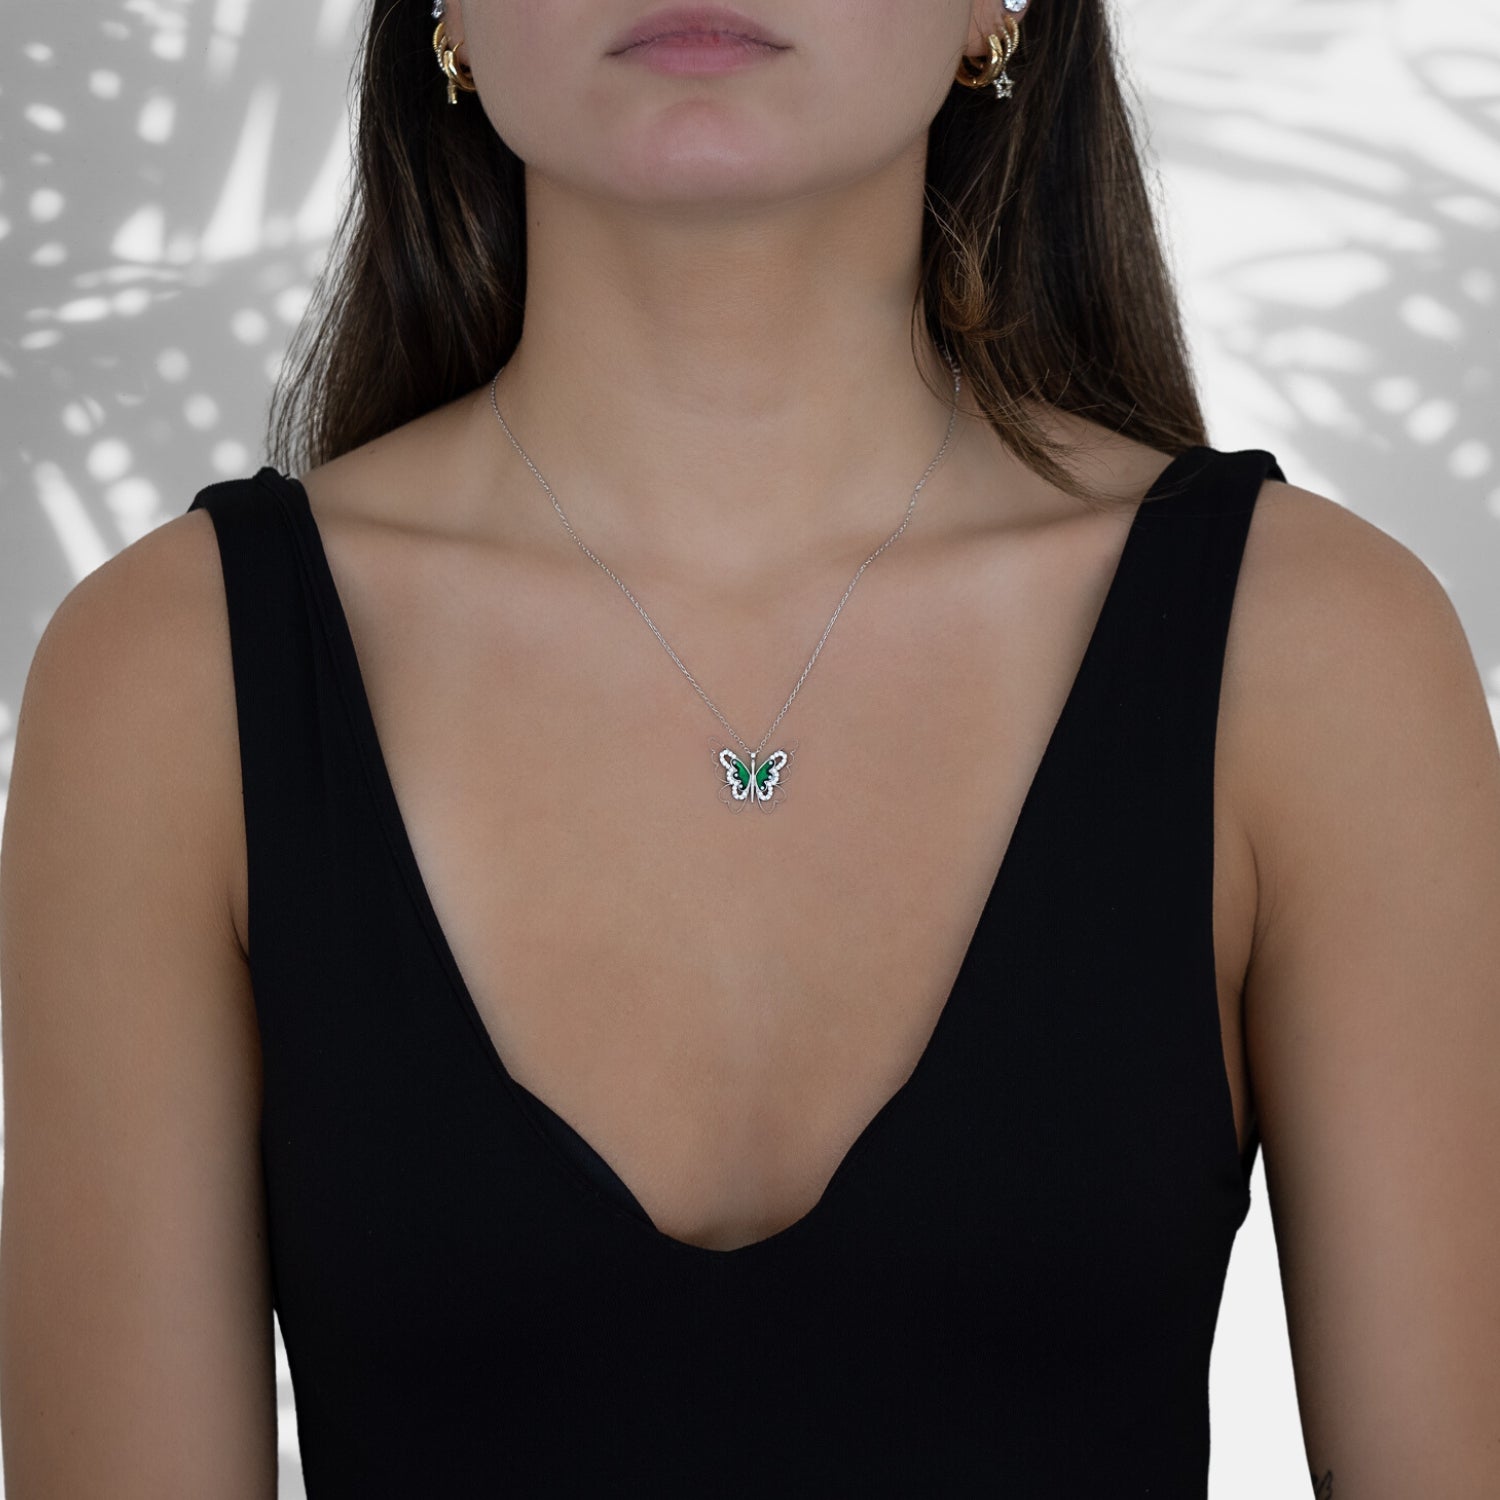 The Abundance Green Butterfly Necklace complementing the model's style with grace and beauty.